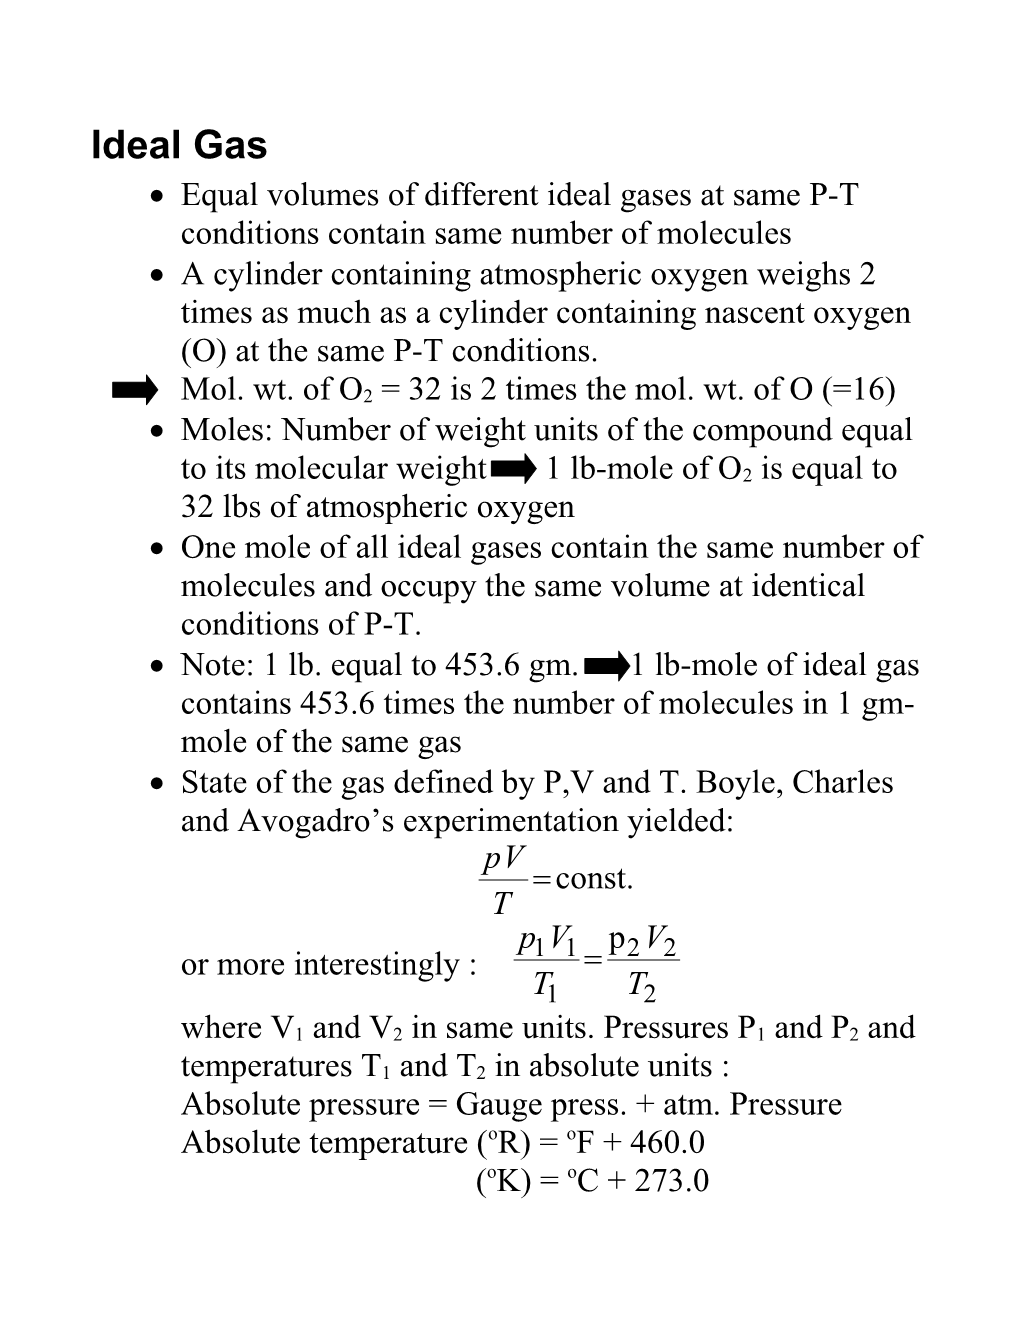 Equal Volumes of Different Ideal Gases at Same P-T Conditions Contain Same Number of Molecules